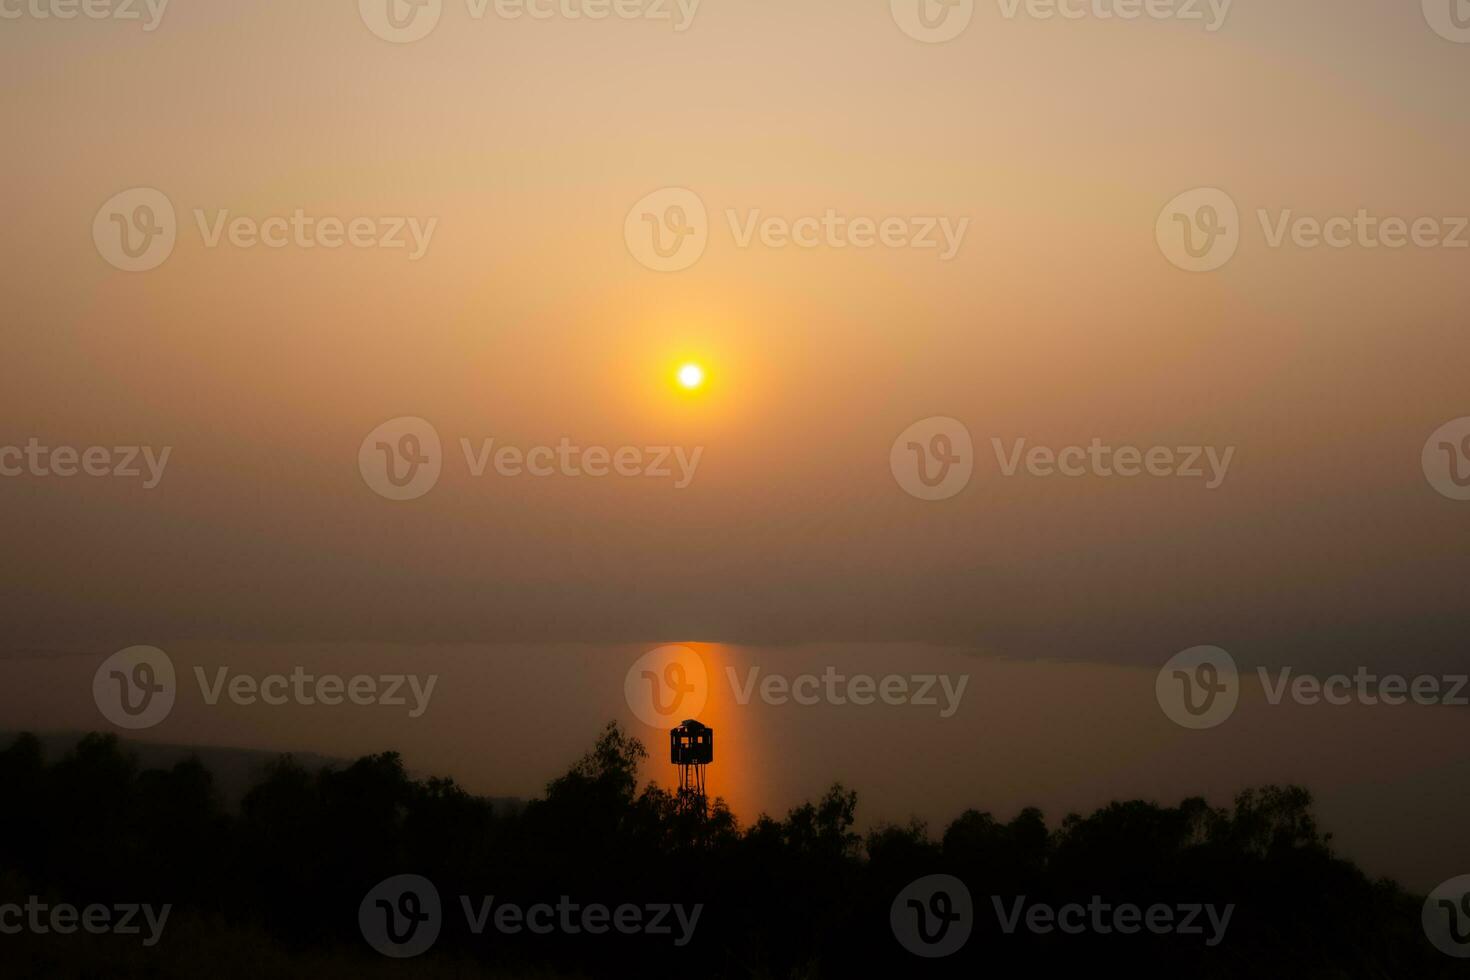 The river in Nakhon Ratchasima province where the sun is setting through the thick fog behind the mountains, giving rise to the orange color of the sun in the evening. photo